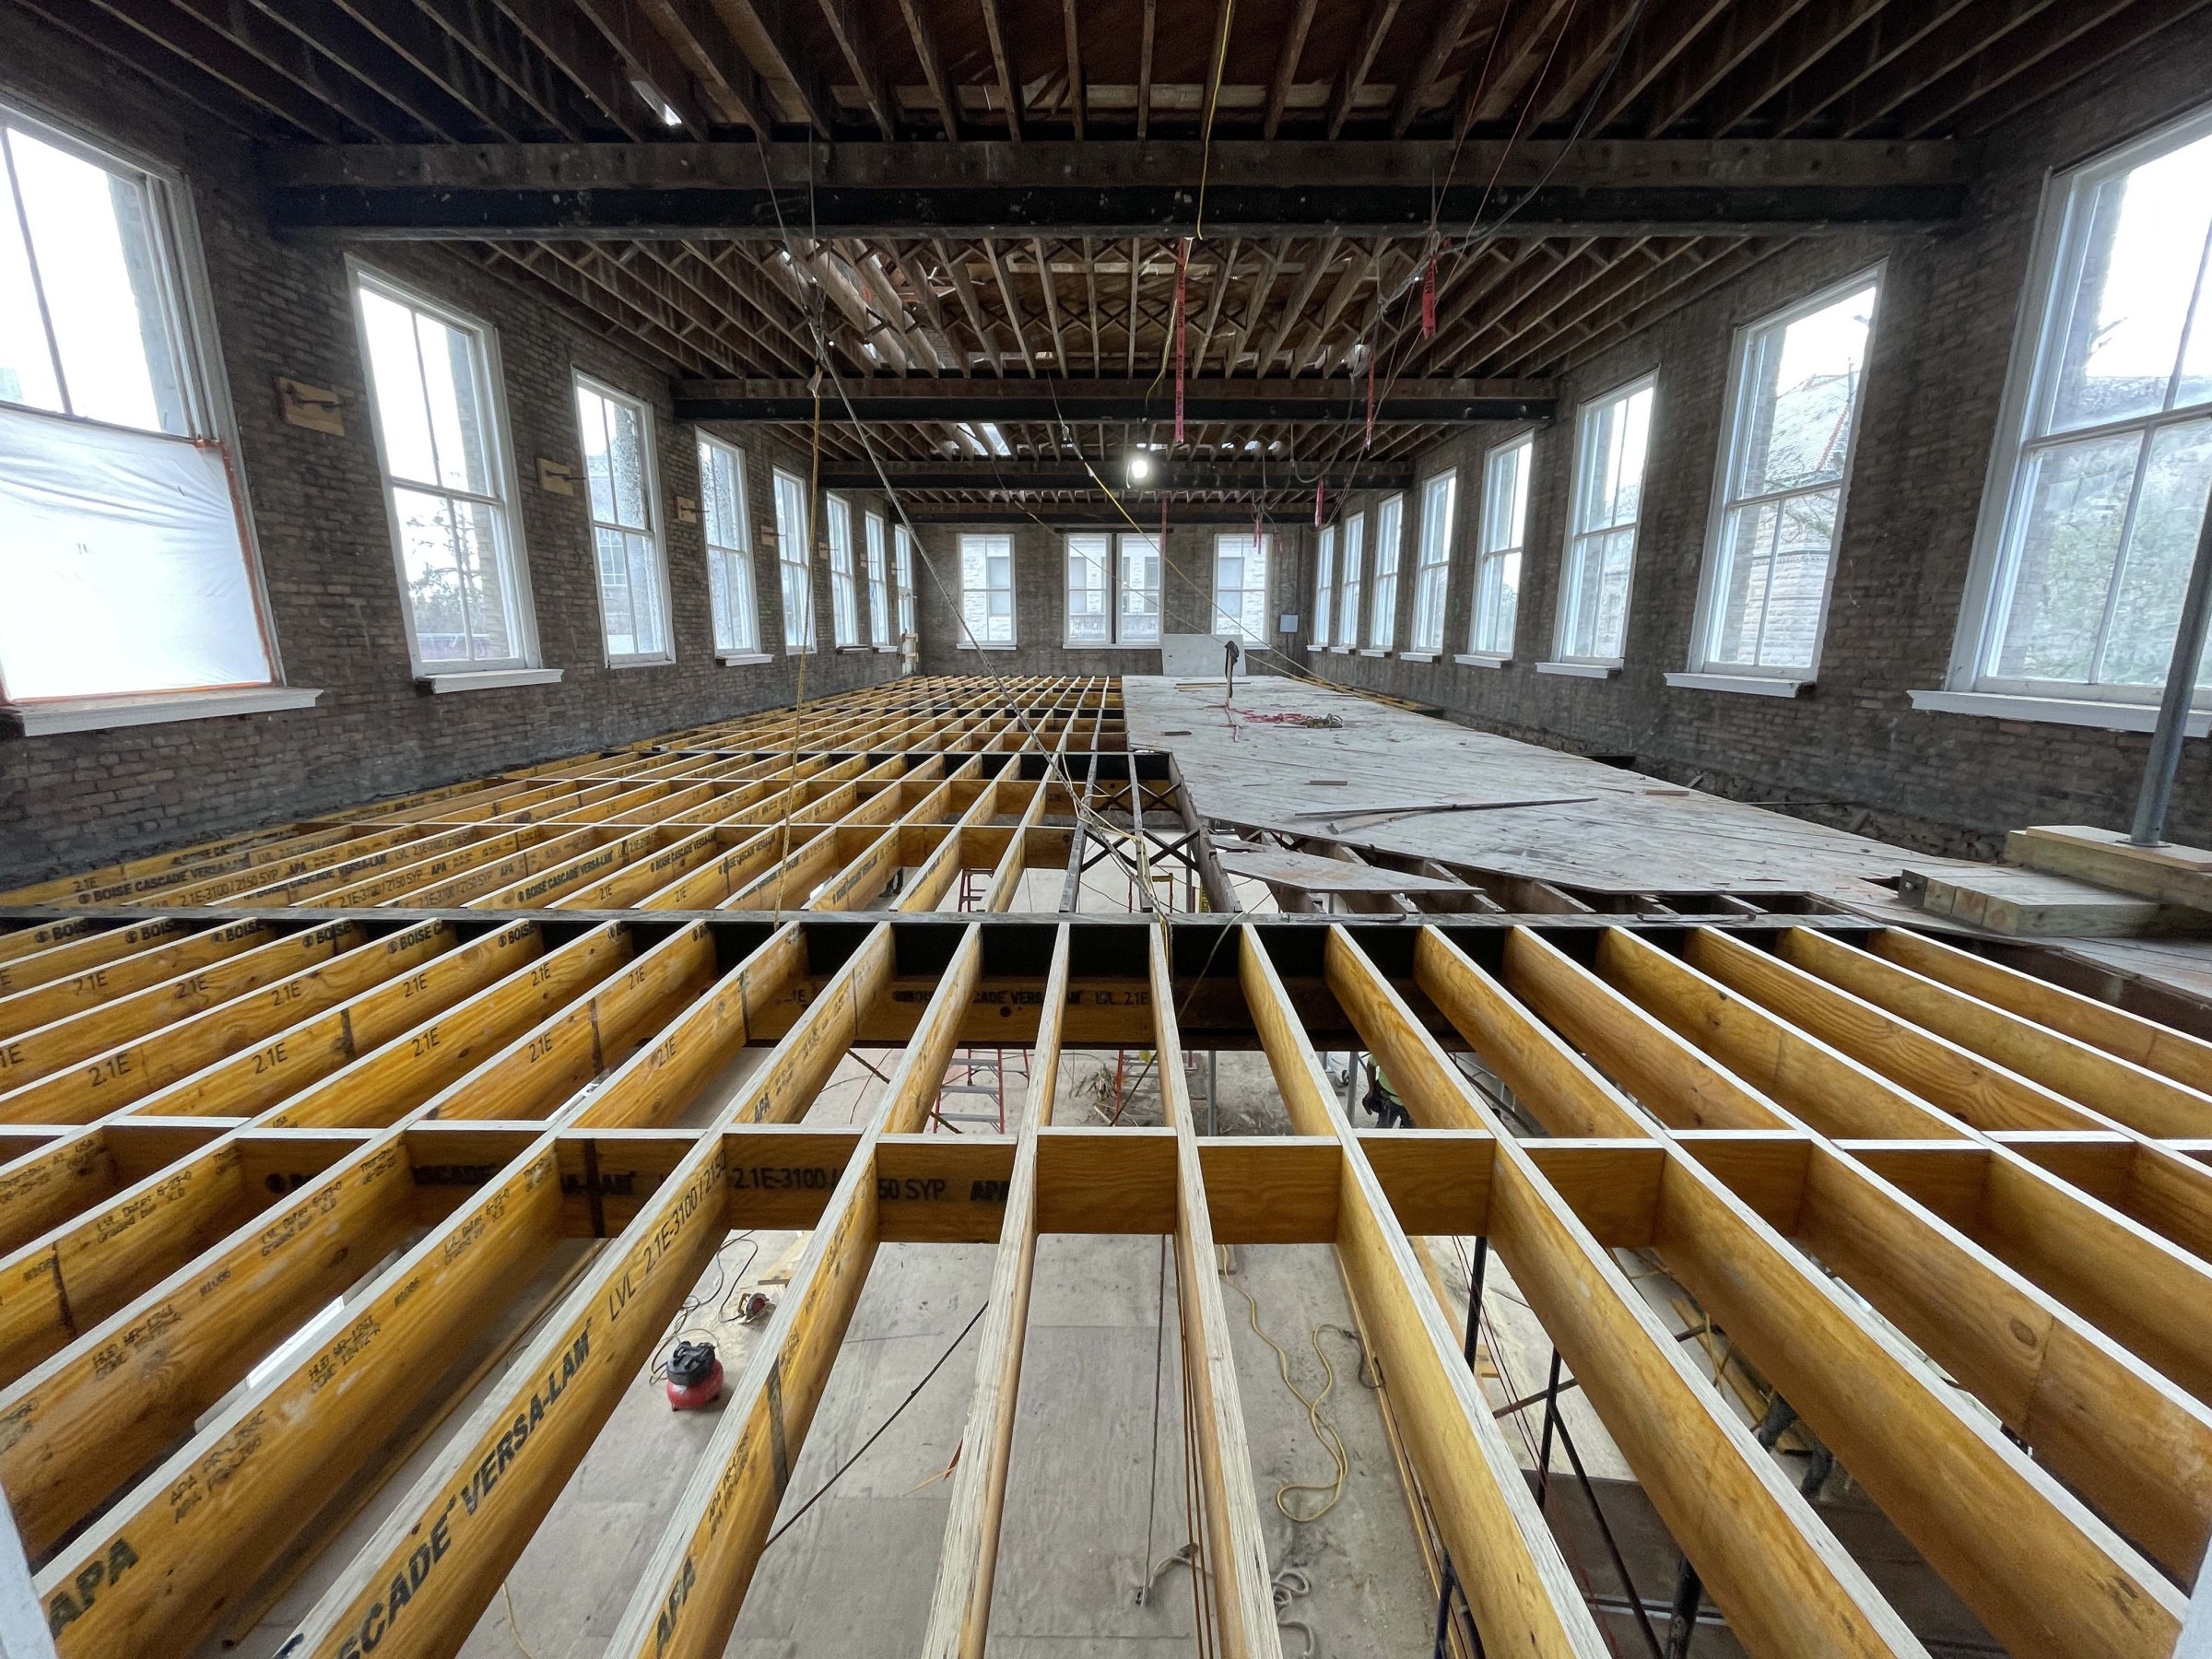 Interior photo of mid-renovation historic building with exposed beams for a new sub-floor running vertical in the picture and large windows on either side and back wall of the large room